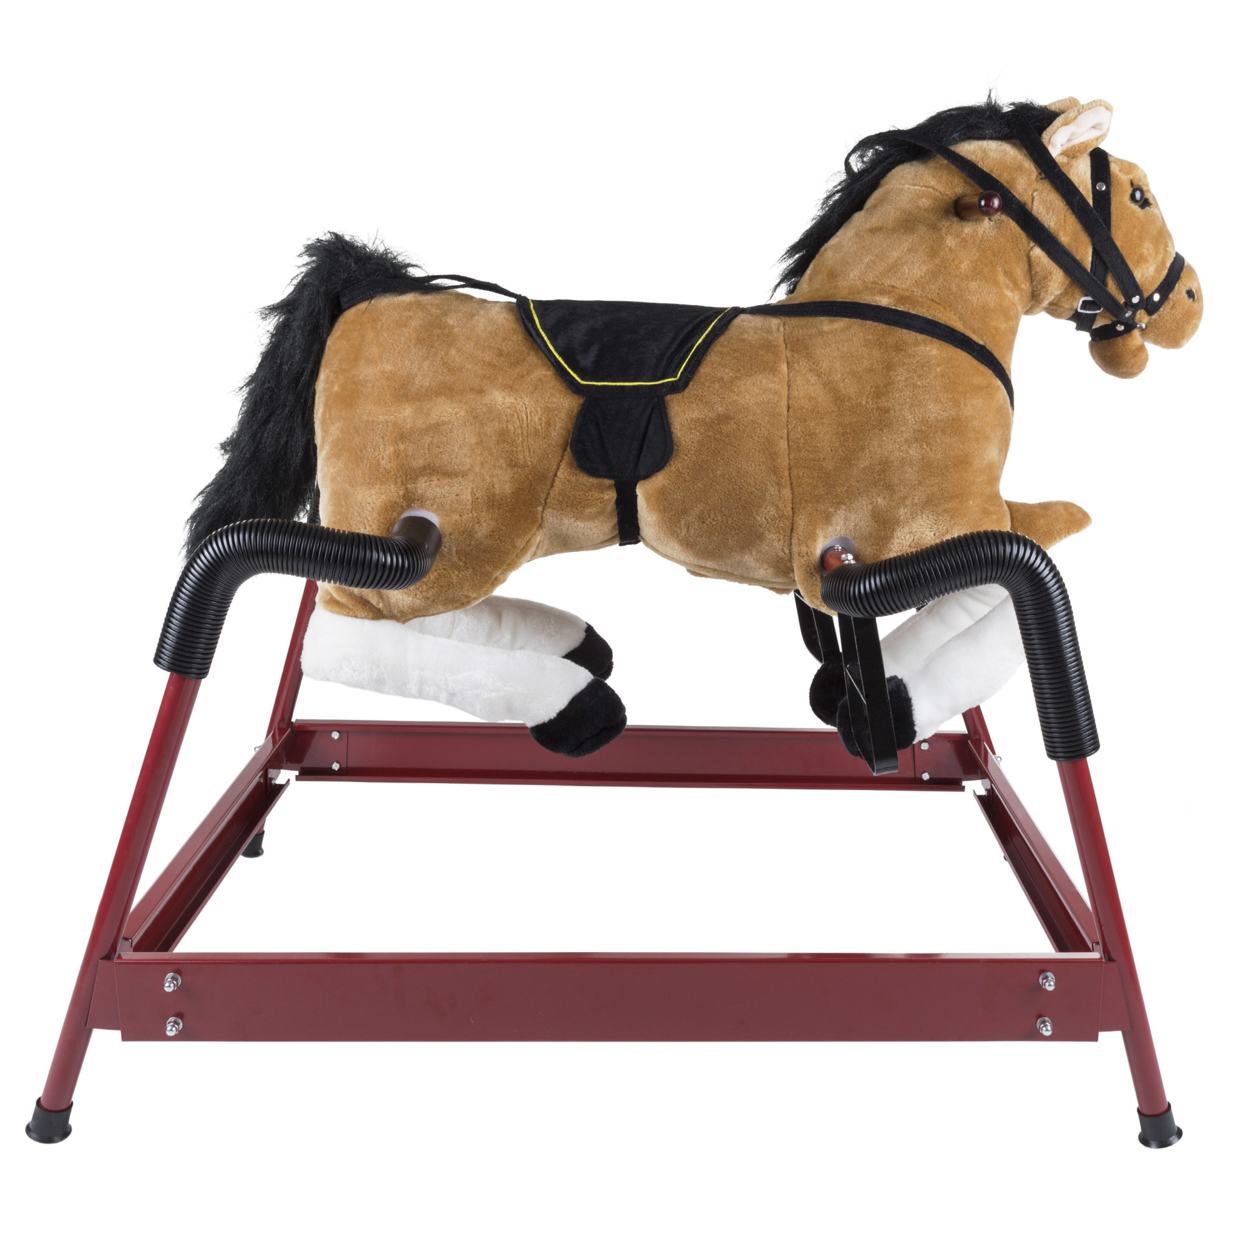 Happy Trails Spring Rocking Horse Plush Ride on Toy with Adjustable Foot Stirrups and Sounds for Toddlers to 5 Years Old